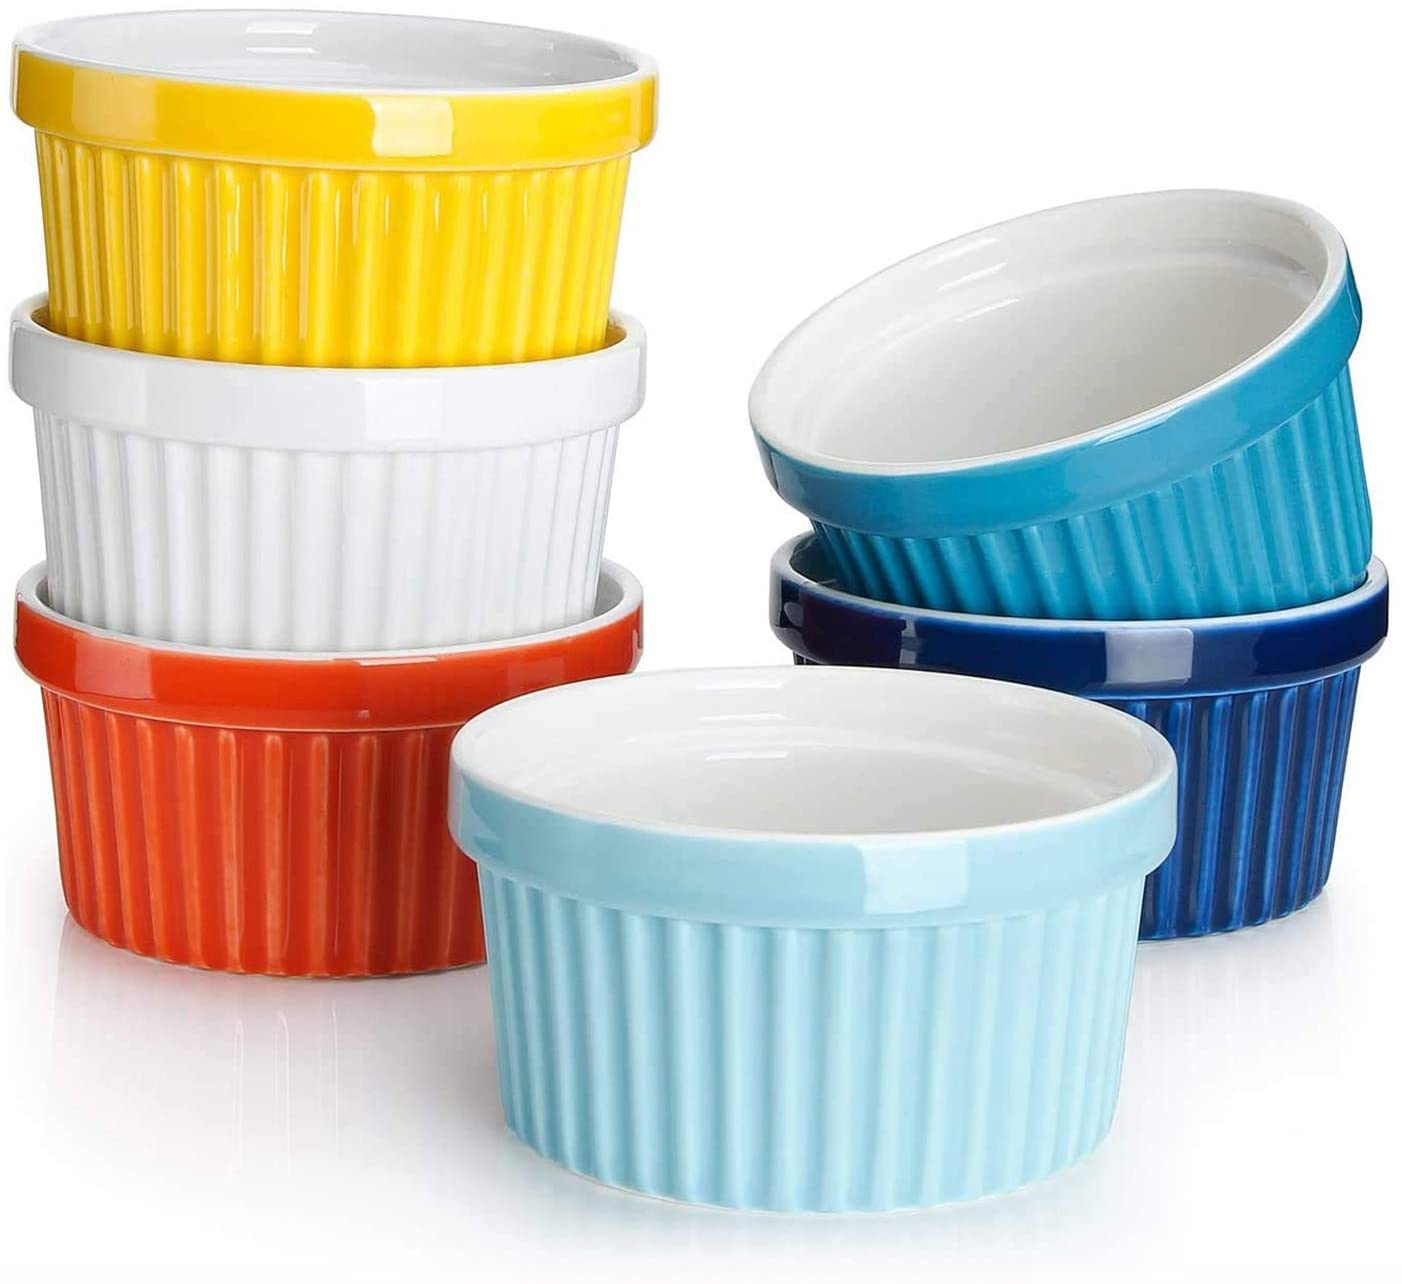 6 PC 8 Ounce Sweese Hot Assorted Colors Porcelain Mini Souffle Dishes $8.99 + Free Shipping w/Prime or orders $25+